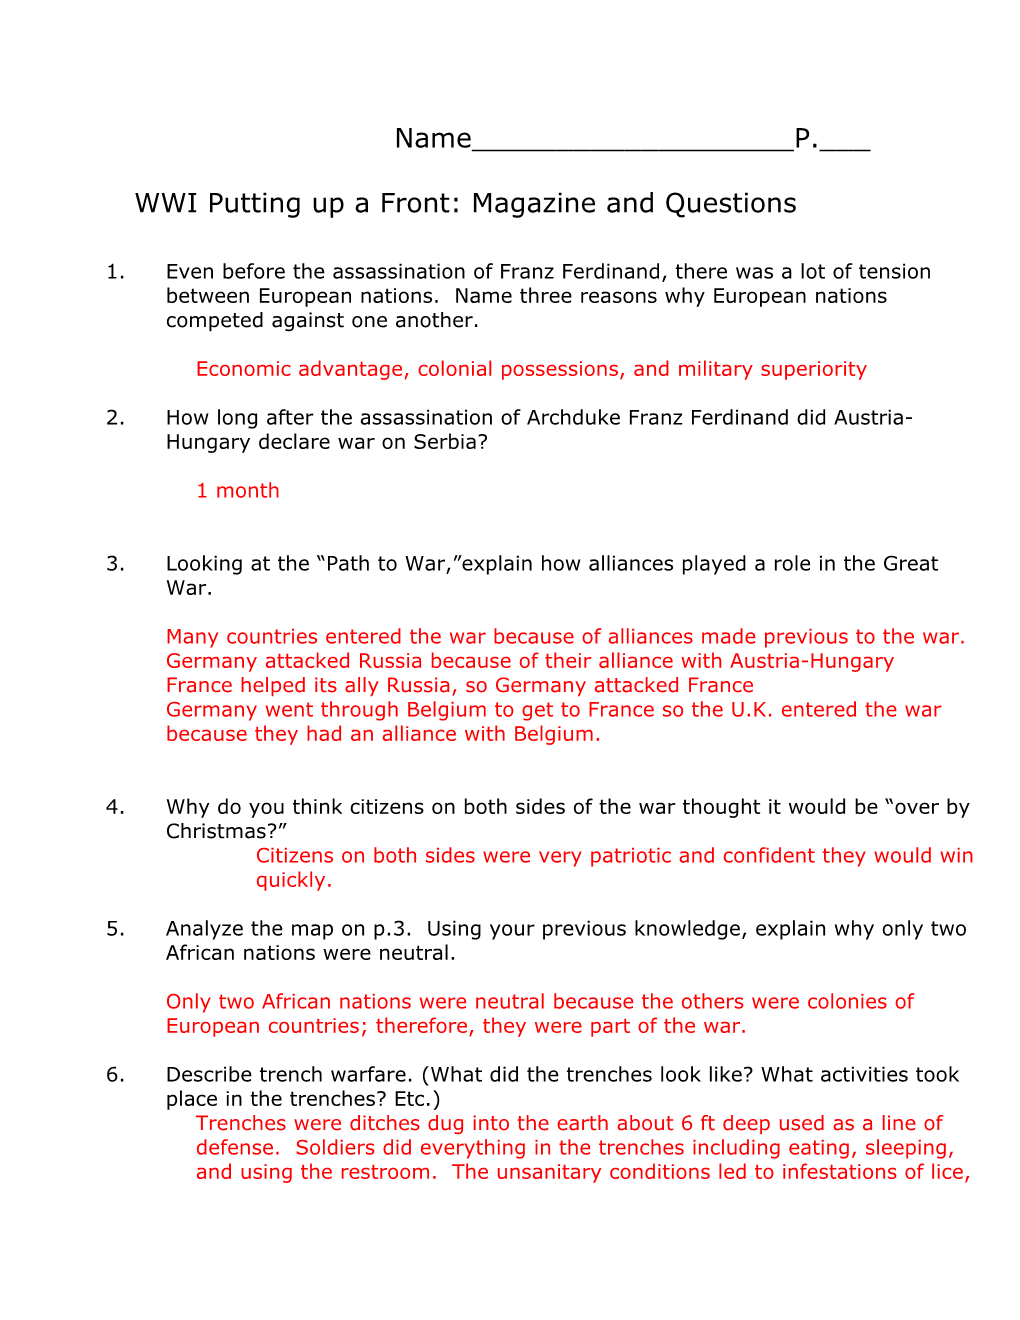 WWI Putting up a Front: Magazine and Questions